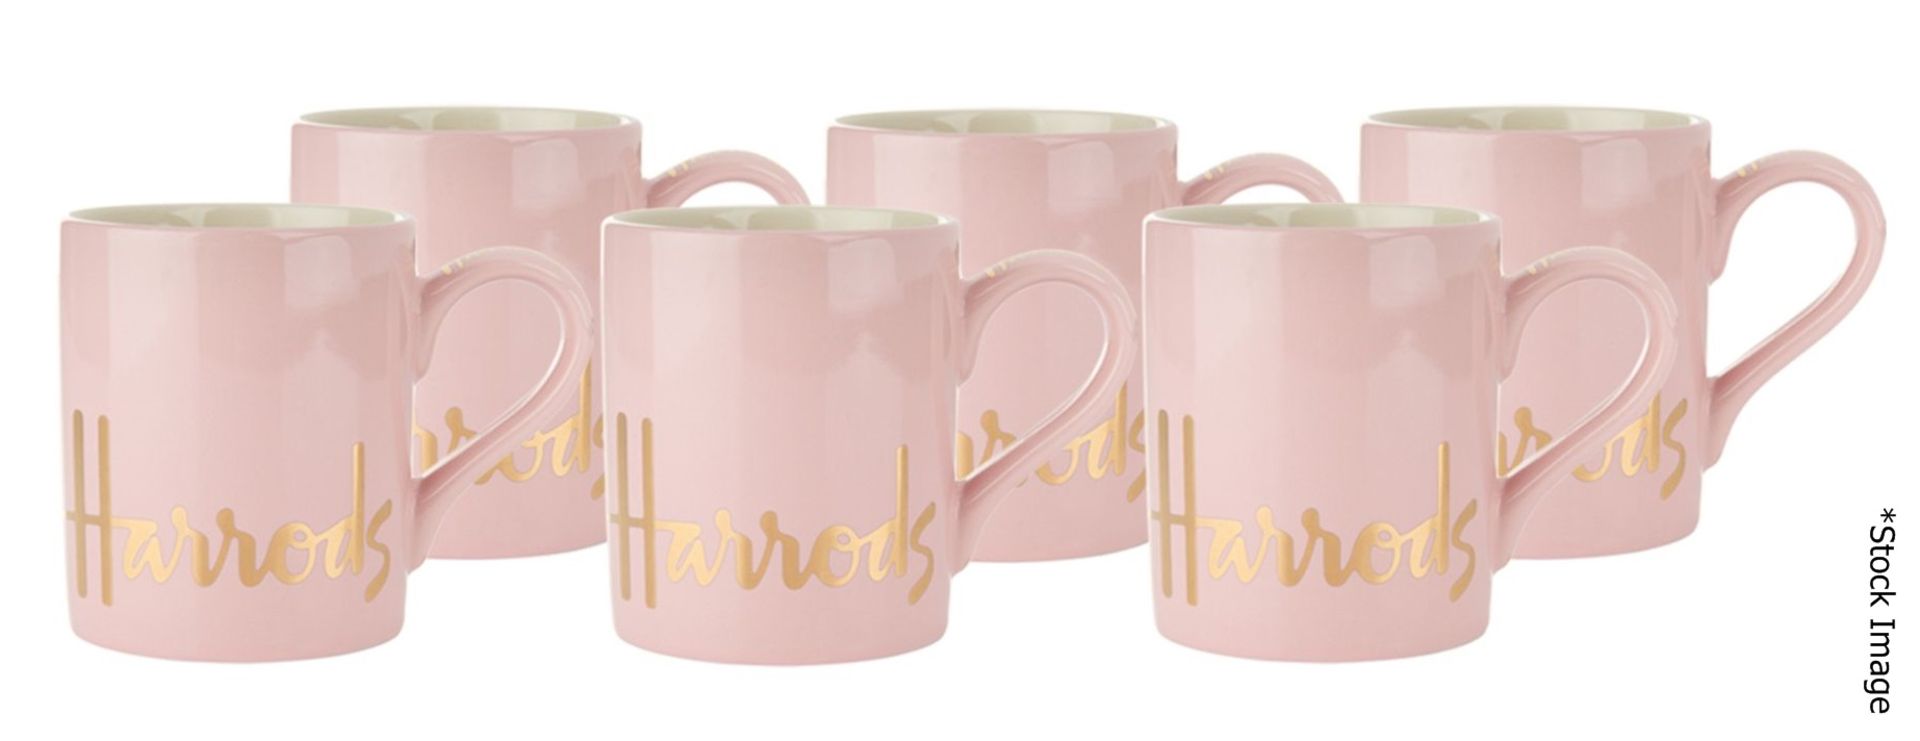 Set Of 6 x HARRODS Branded Mugs In Pink With Gold-Tone Logo Design - Dimensions: 9cm x 8cm -